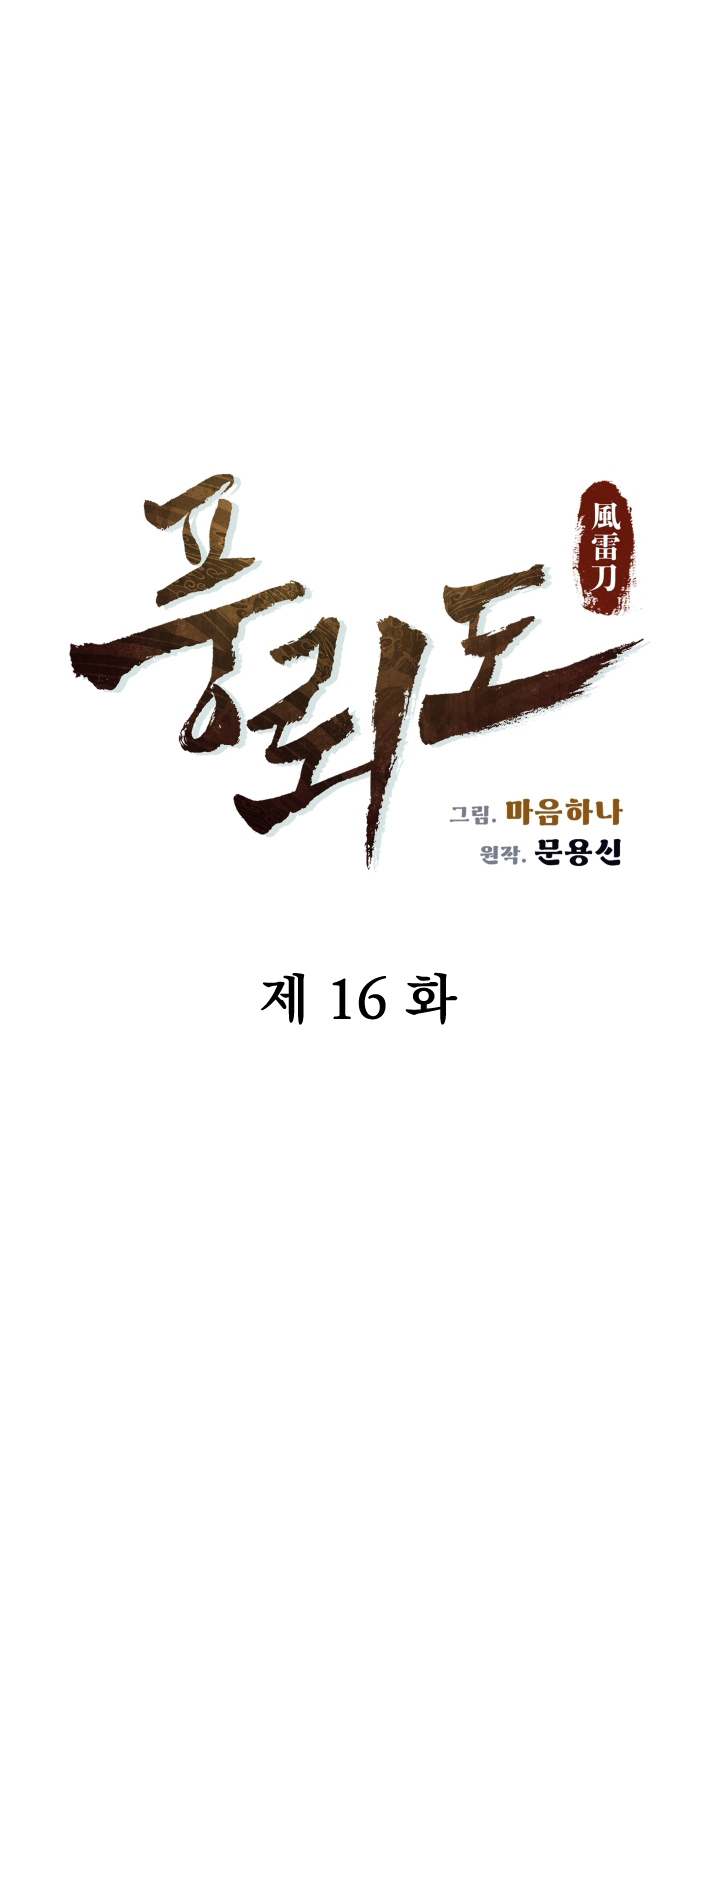 Blade Of Wind and Thunder 16 (10)